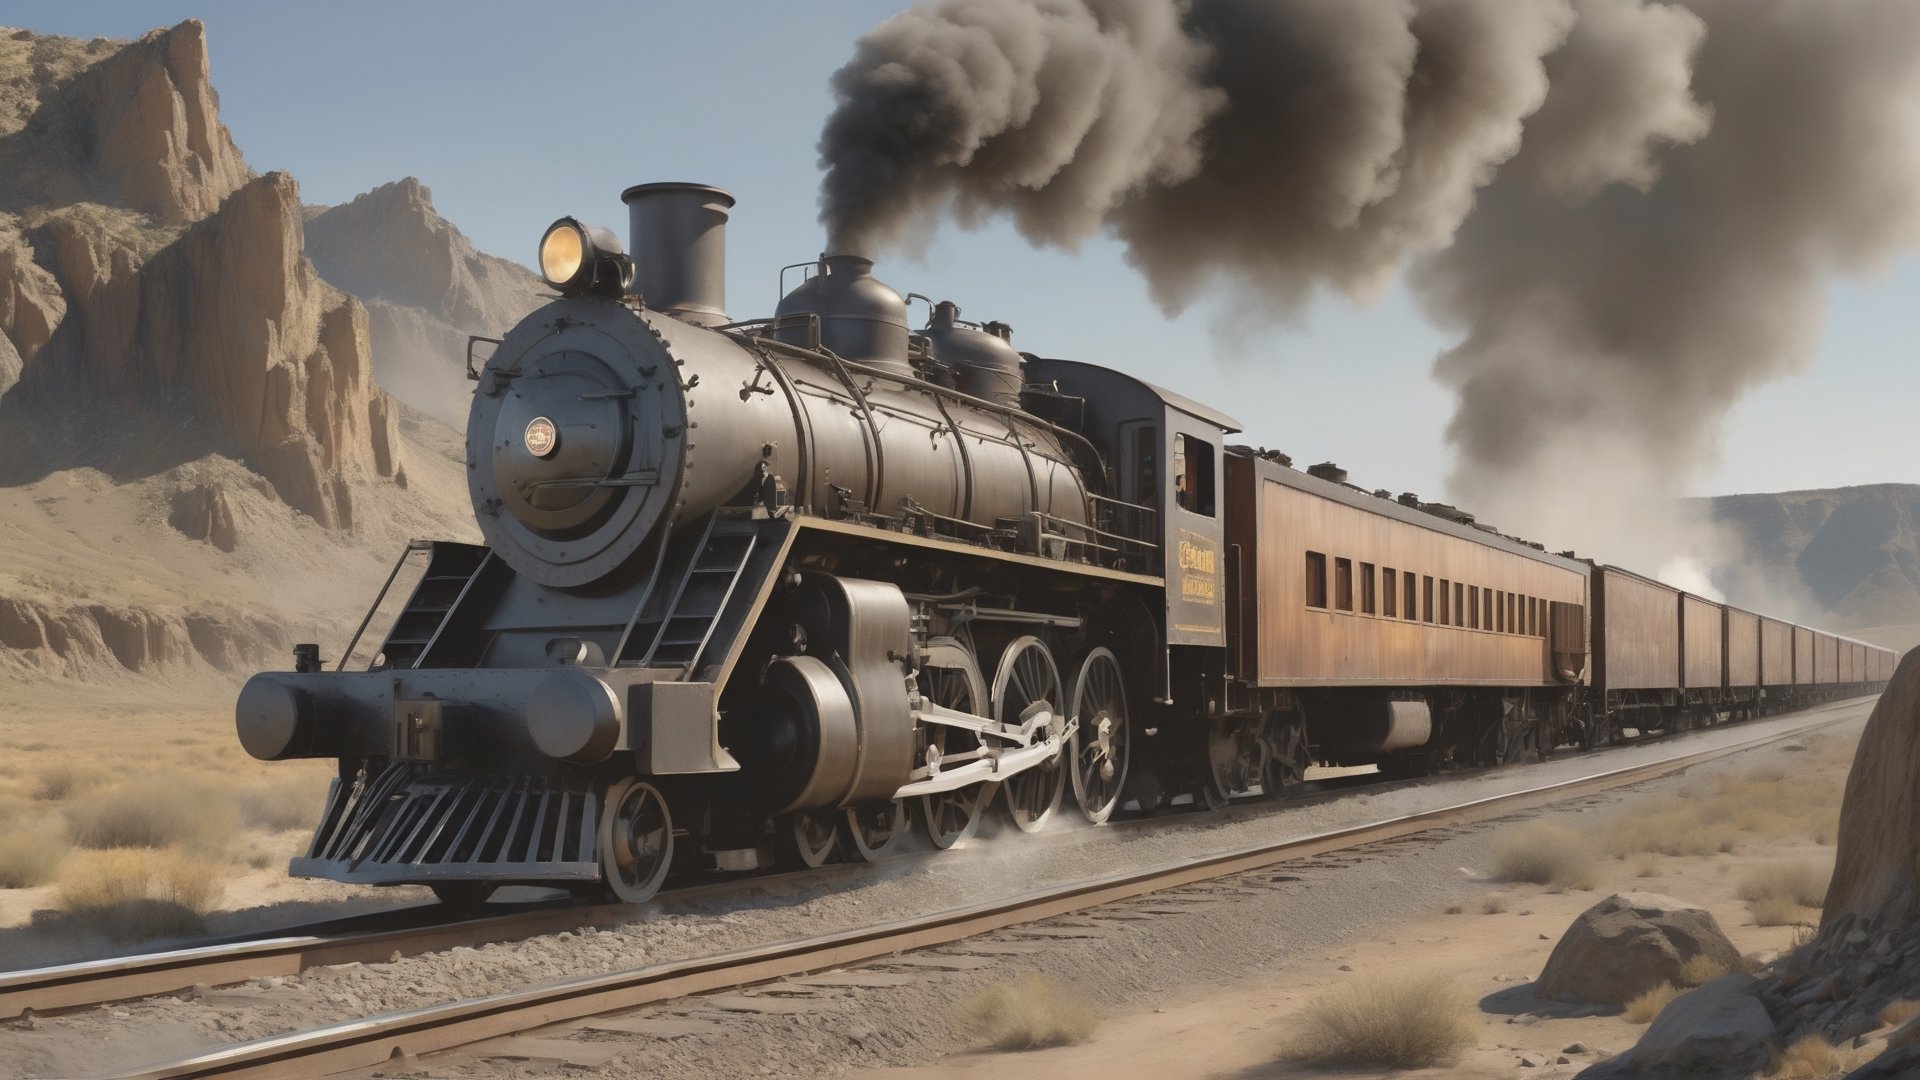 Create a hyper-realistic image of a steam locomotive from the Western frontier era, chugging through a rugged landscape. The locomotive, a behemoth of iron and steel, belches thick plumes of steam and smoke from its tall stack as it powers forward on steel tracks. Every detail is meticulously rendered: the gleaming metal of the engine, the intricate gears and pistons, and the rivets holding it all together. Its cowcatcher extends proudly, ready to clear debris from the tracks ahead. The landscape is equally detailed, with rocky cliffs, sparse desert vegetation, and a distant horizon that hints at the vastness of the frontier. The sunlight casts dramatic shadows across the scene, emphasizing the rugged beauty of the untamed wilderness. In the background, a small settlement emerges, its buildings made of weathered wood and surrounded by dusty streets. The locomotive's presence symbolizes progress and expansion, forging ahead into uncharted territory with unstoppable determination.,more detail XL